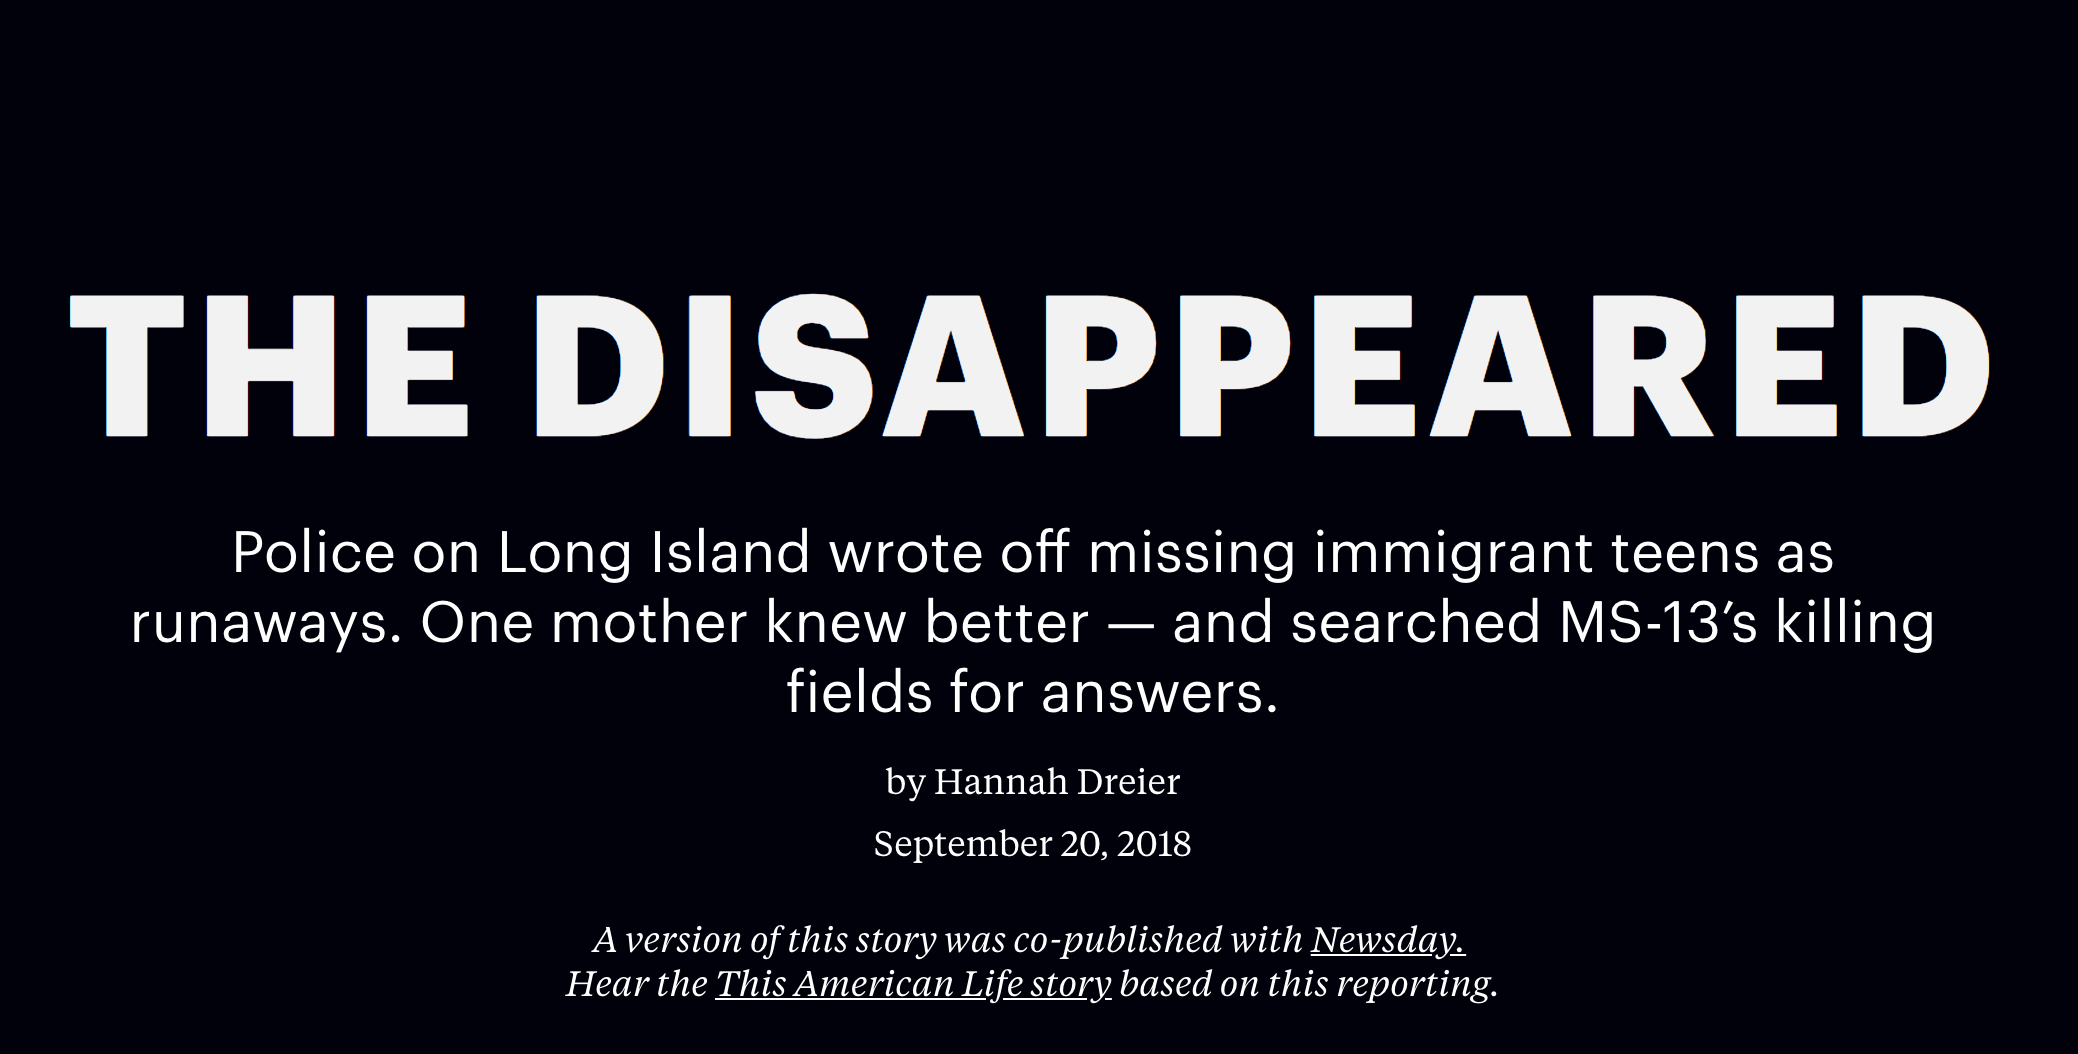 THE DISAPPEARED